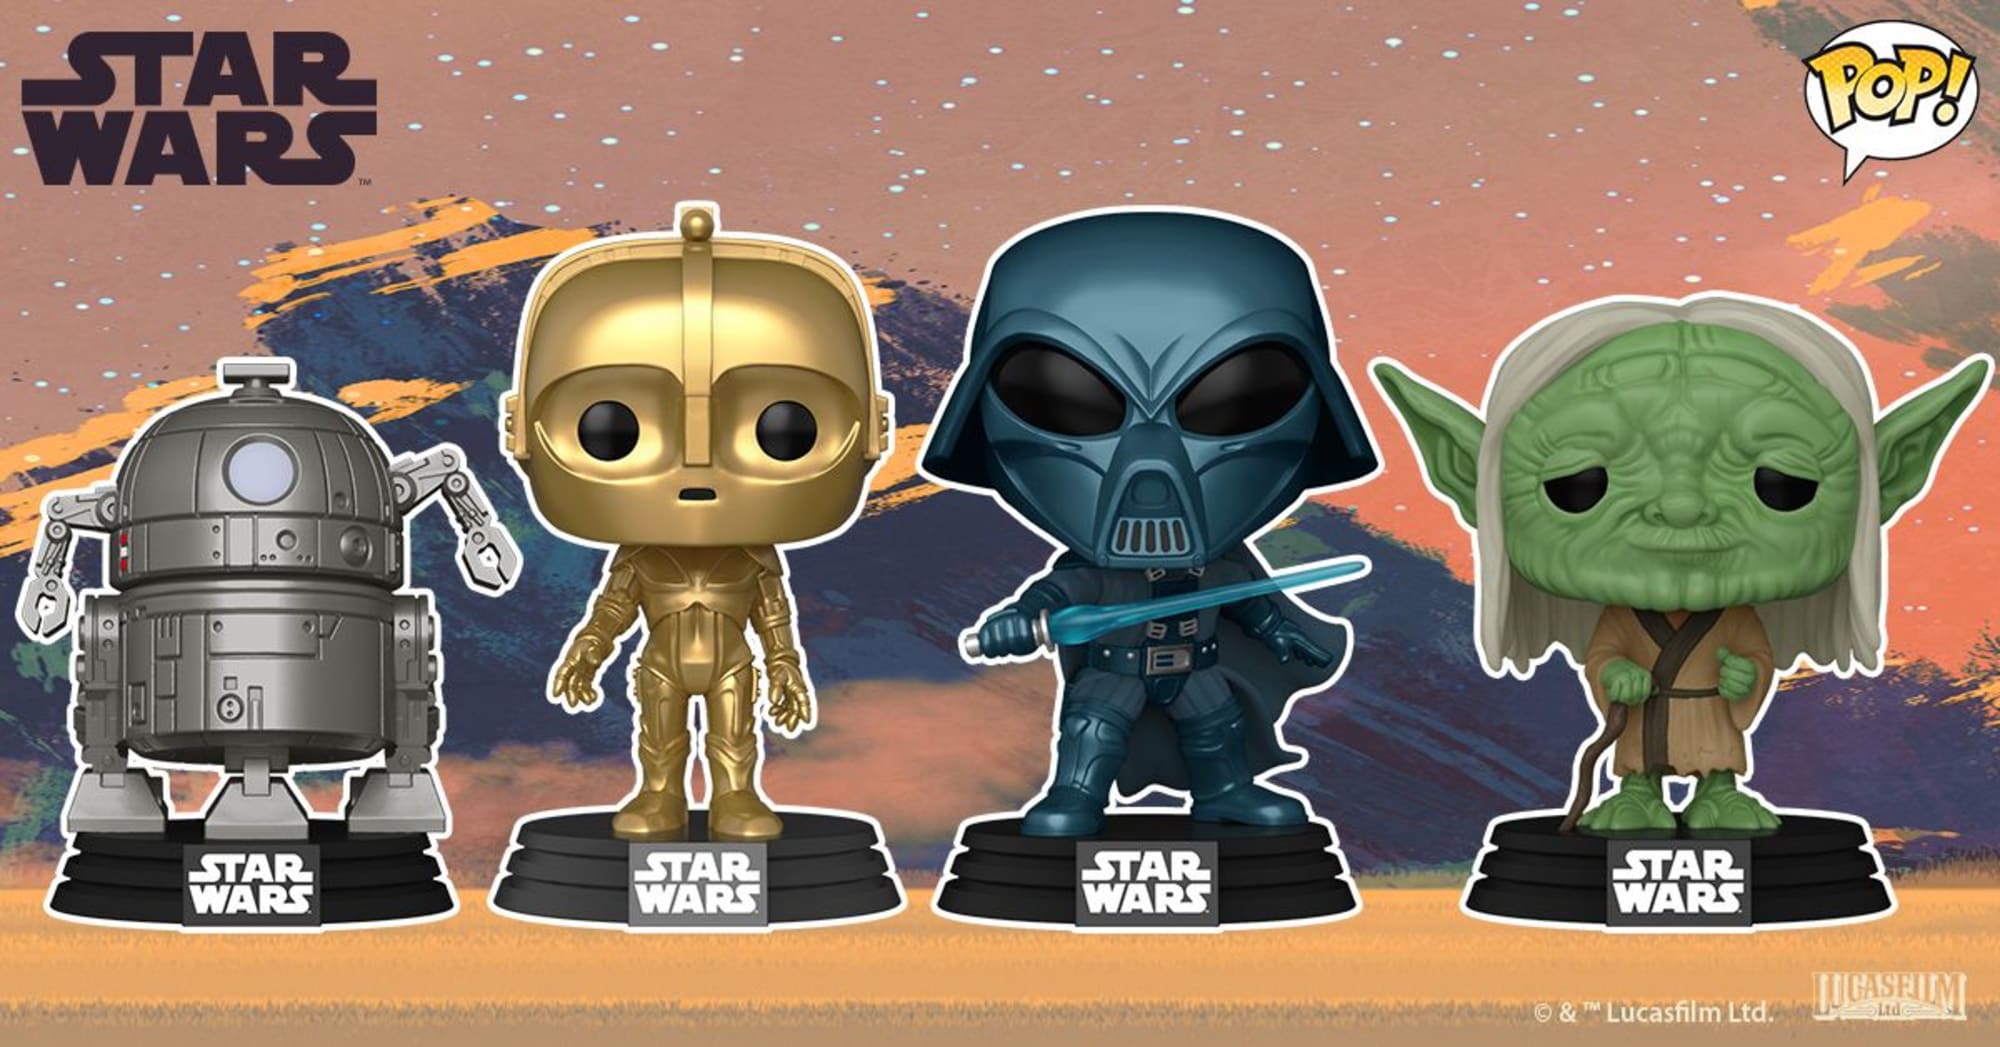 Star Wars is releasing a new line of unique concept art Funko Pops!